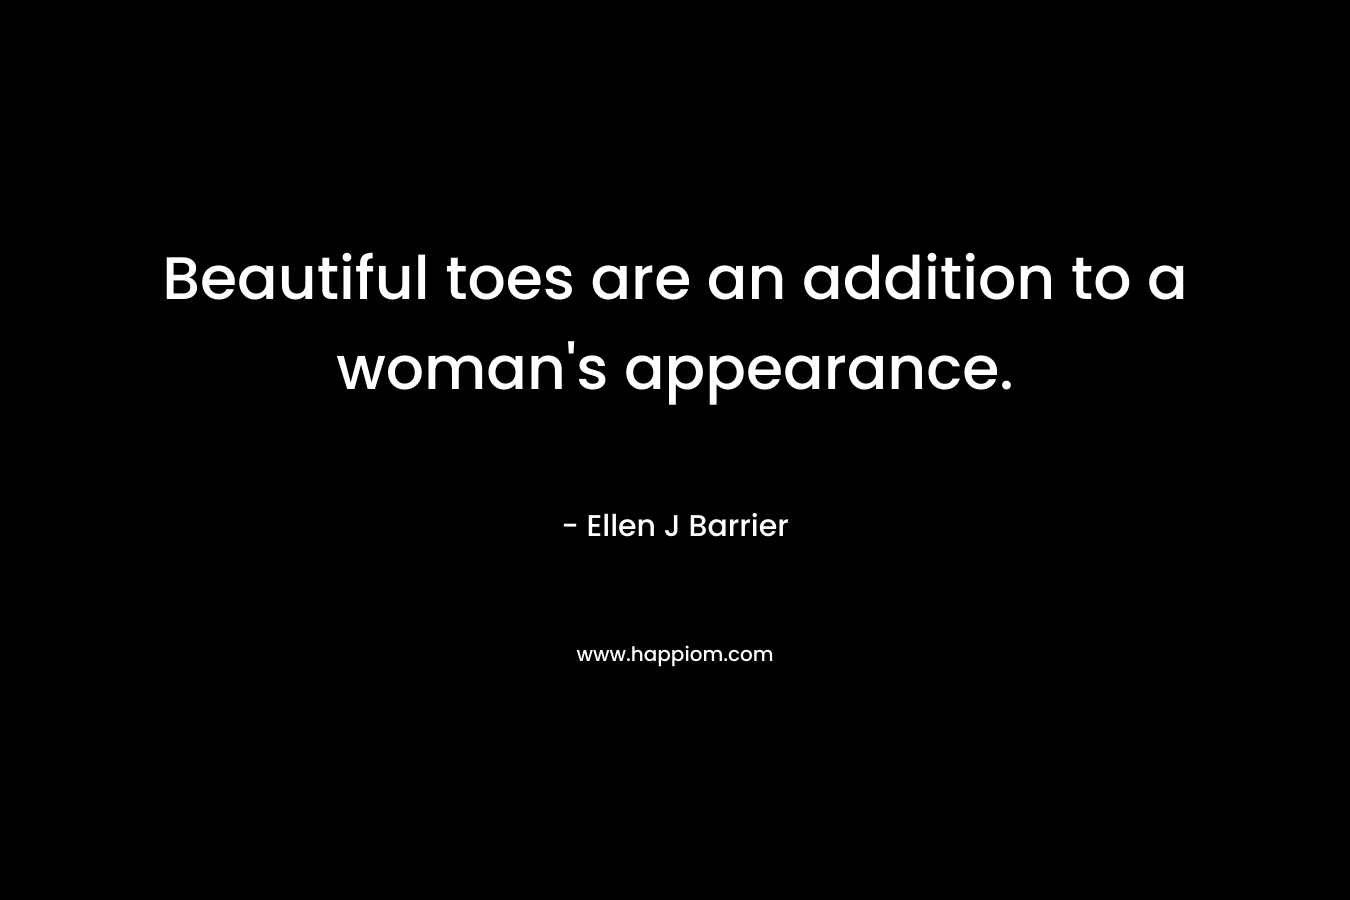 Beautiful toes are an addition to a woman's appearance.